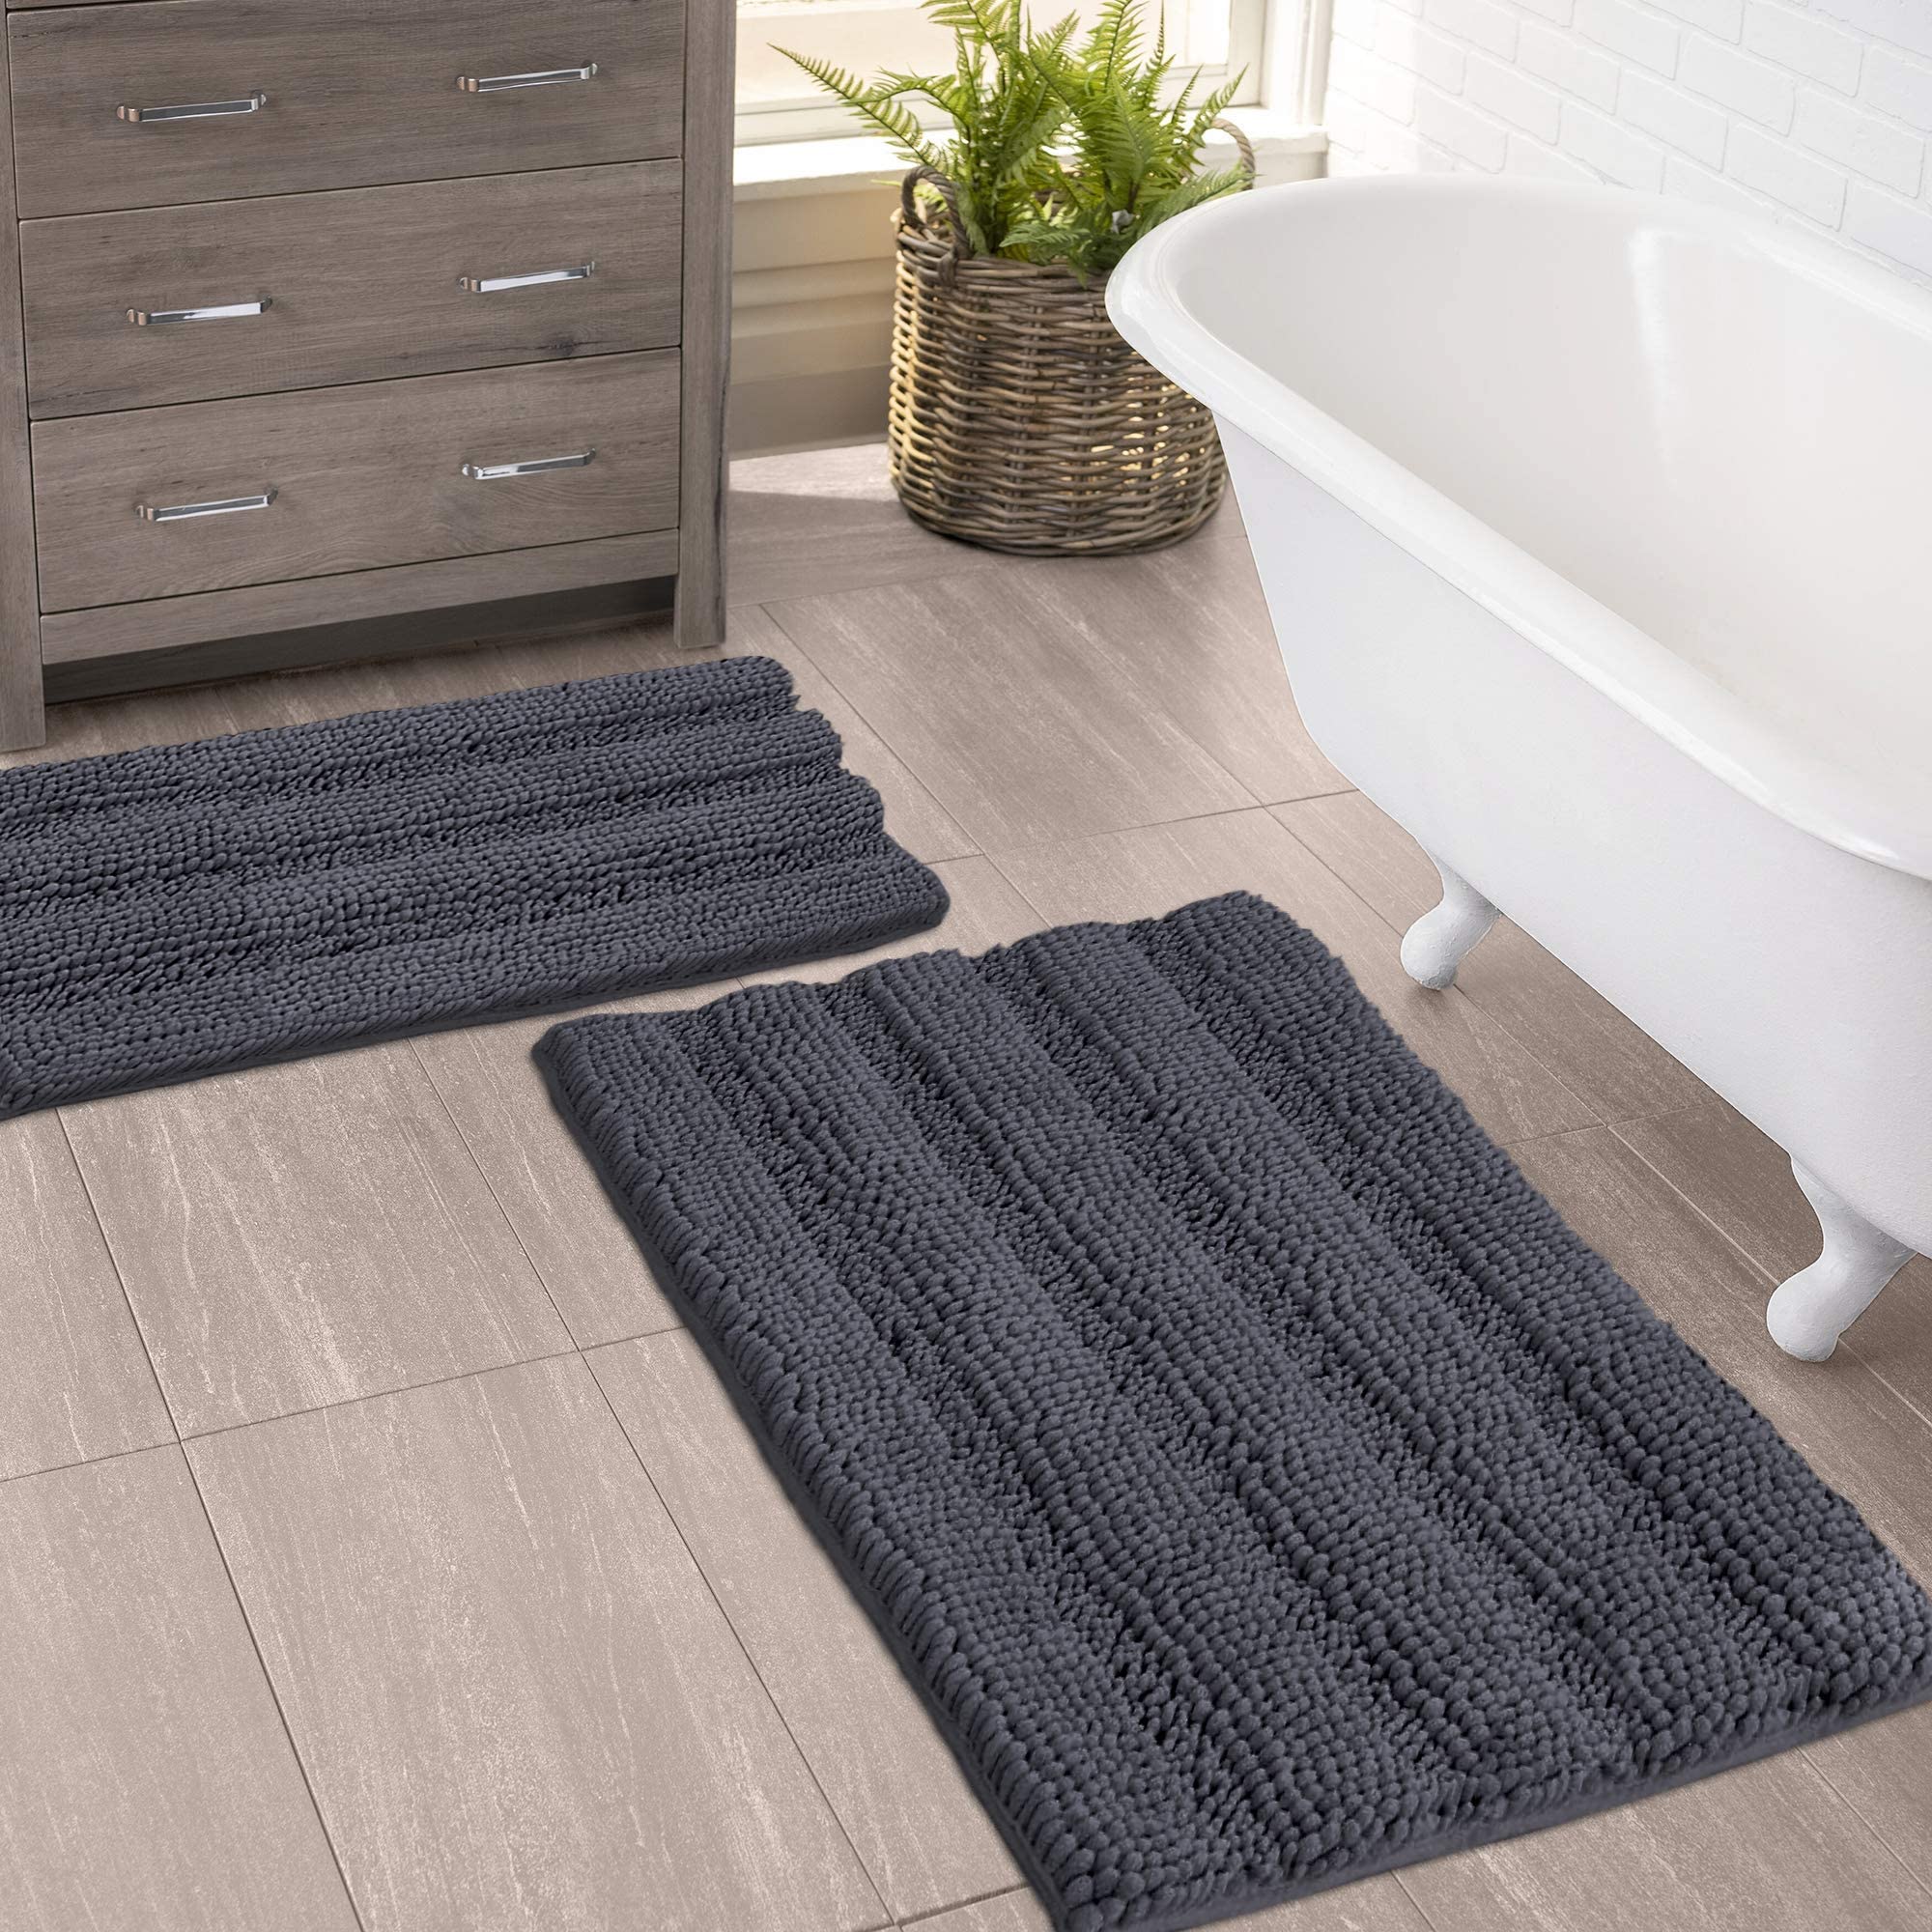 Zebrux Non Slip Thick Shaggy Chenille Bathroom Rugs, Bath Mats for Bathroom Extra Soft and Absorbent - Striped Bath Rugs Set for Indoor/Kitchen  - Good